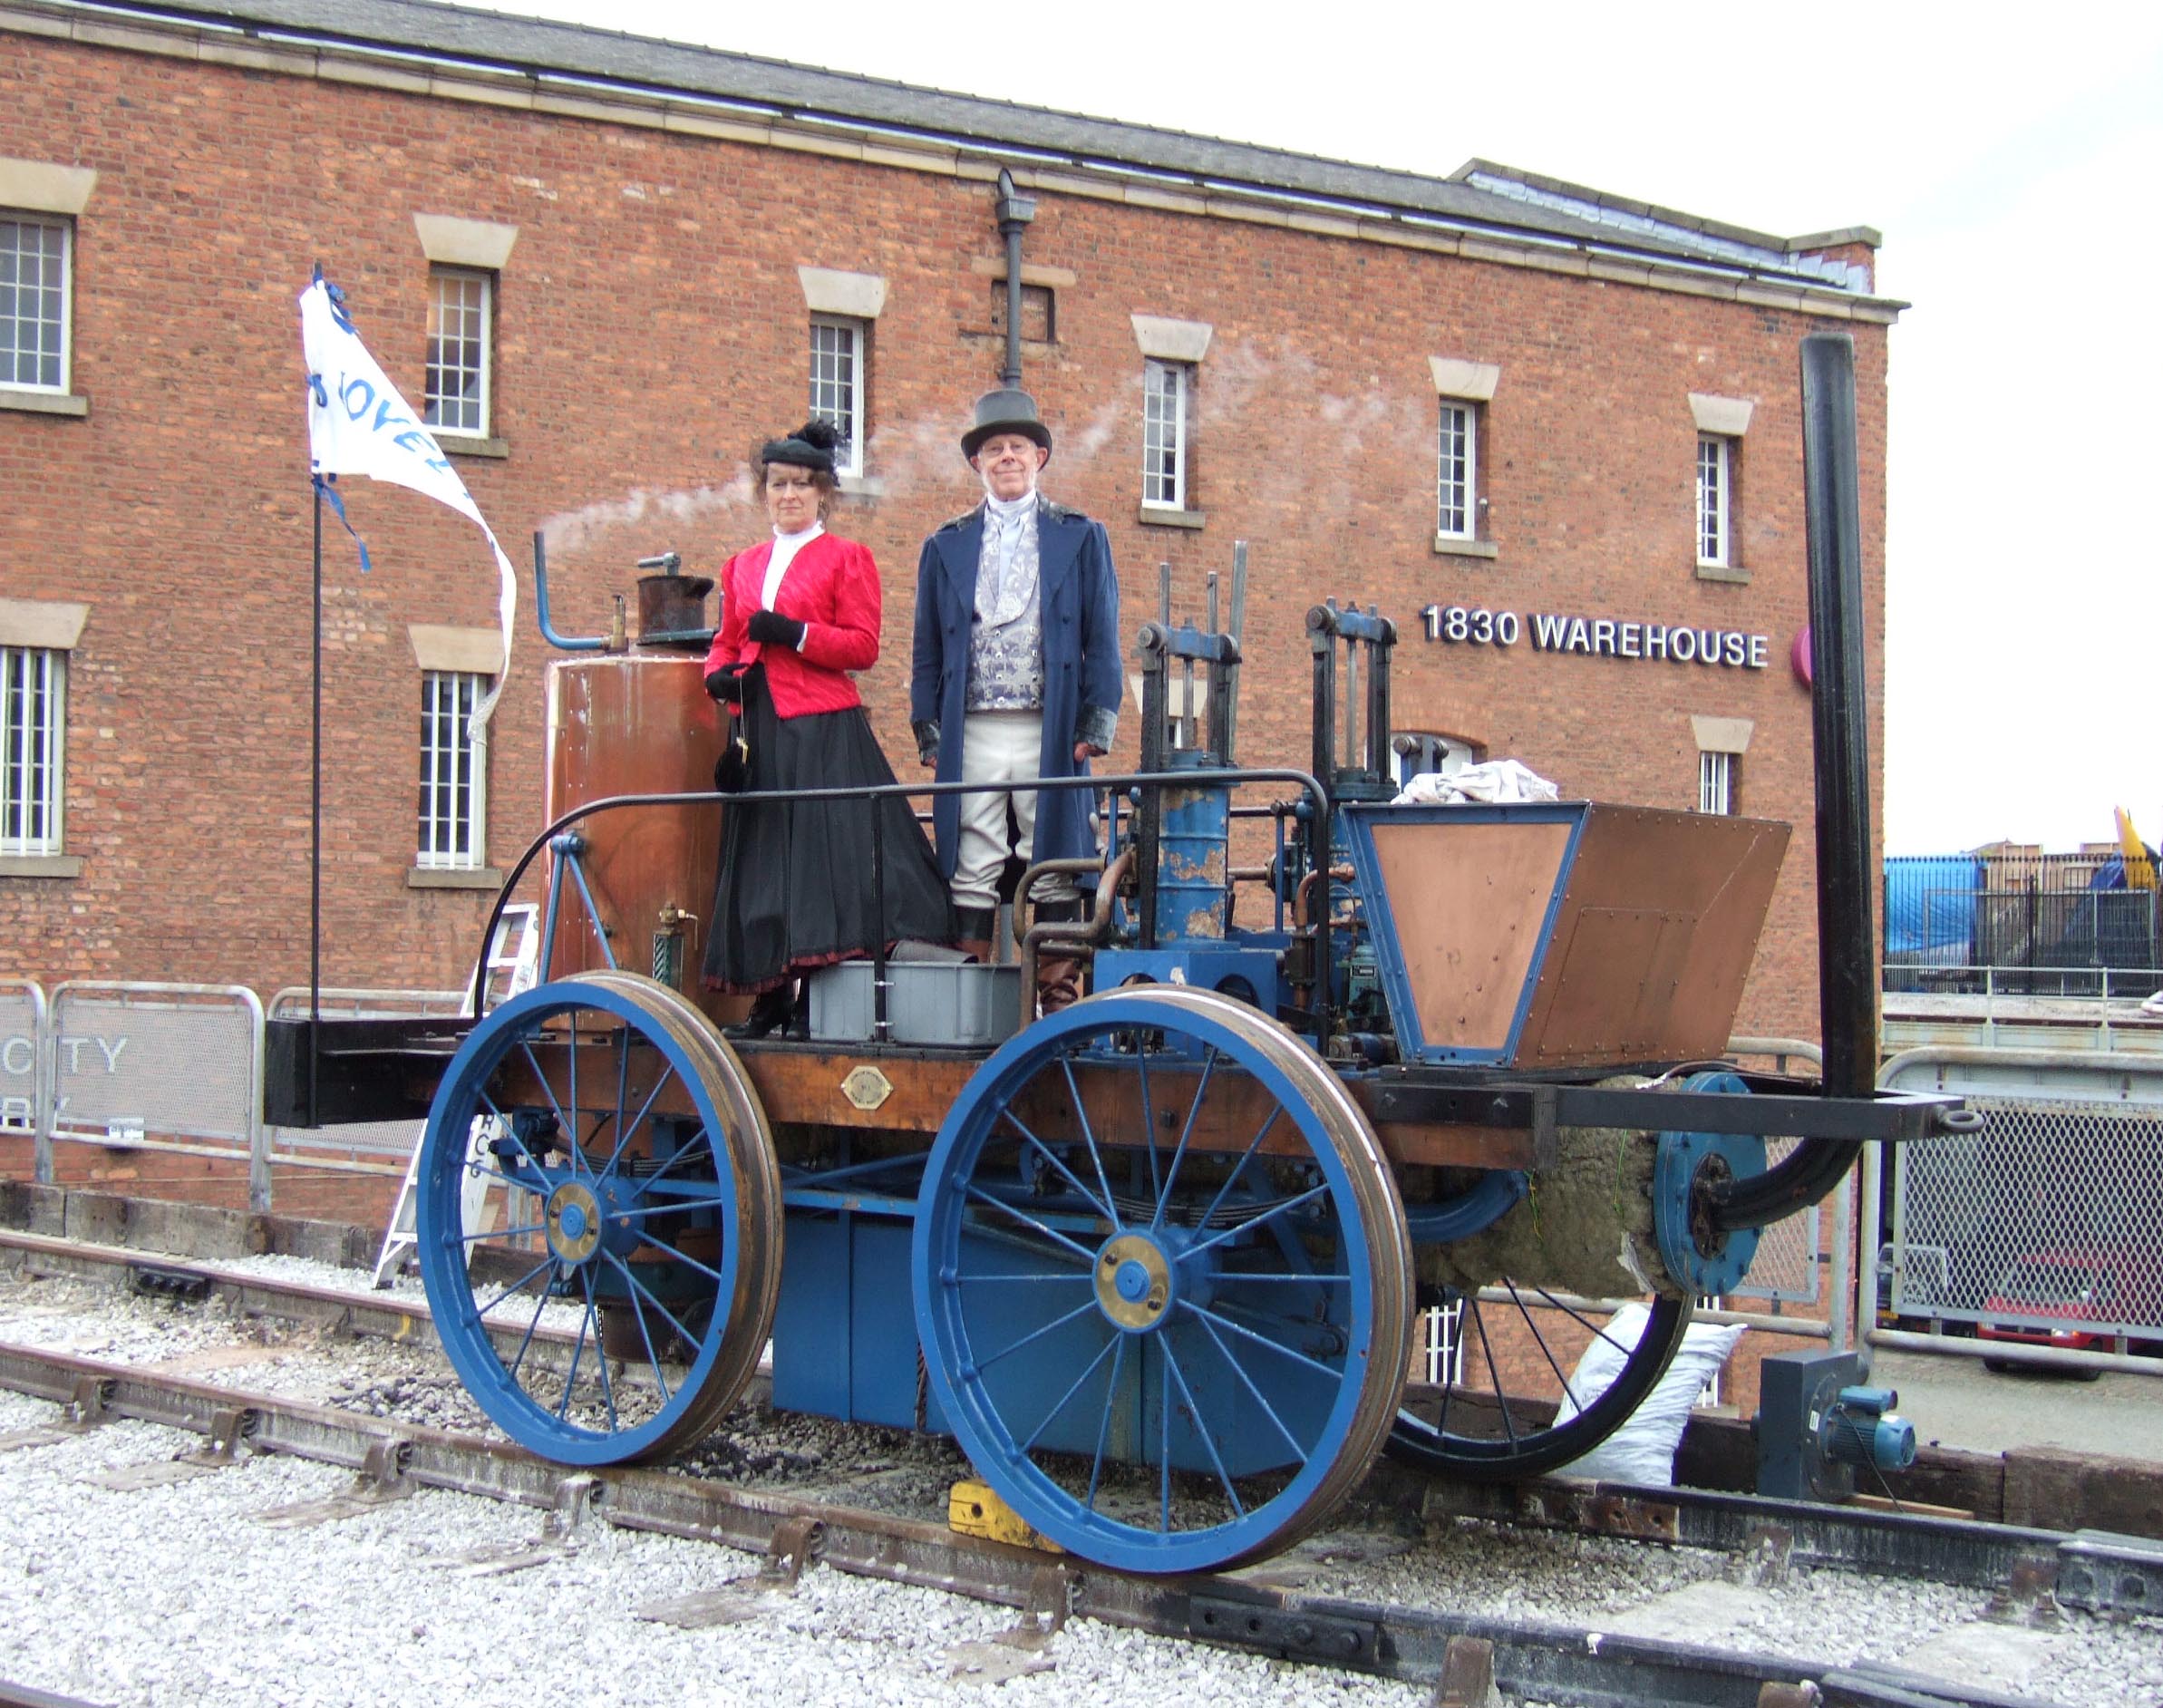 (Working replica of Novelty at the Museum of Science and Industry, Manchester. Standing on the locomotive are Mr & Mrs Braithwaite, Mr Braithwaite is a descendant of the locomotive builder. 17th September 2005 Photographer - A.M.Hurrell)